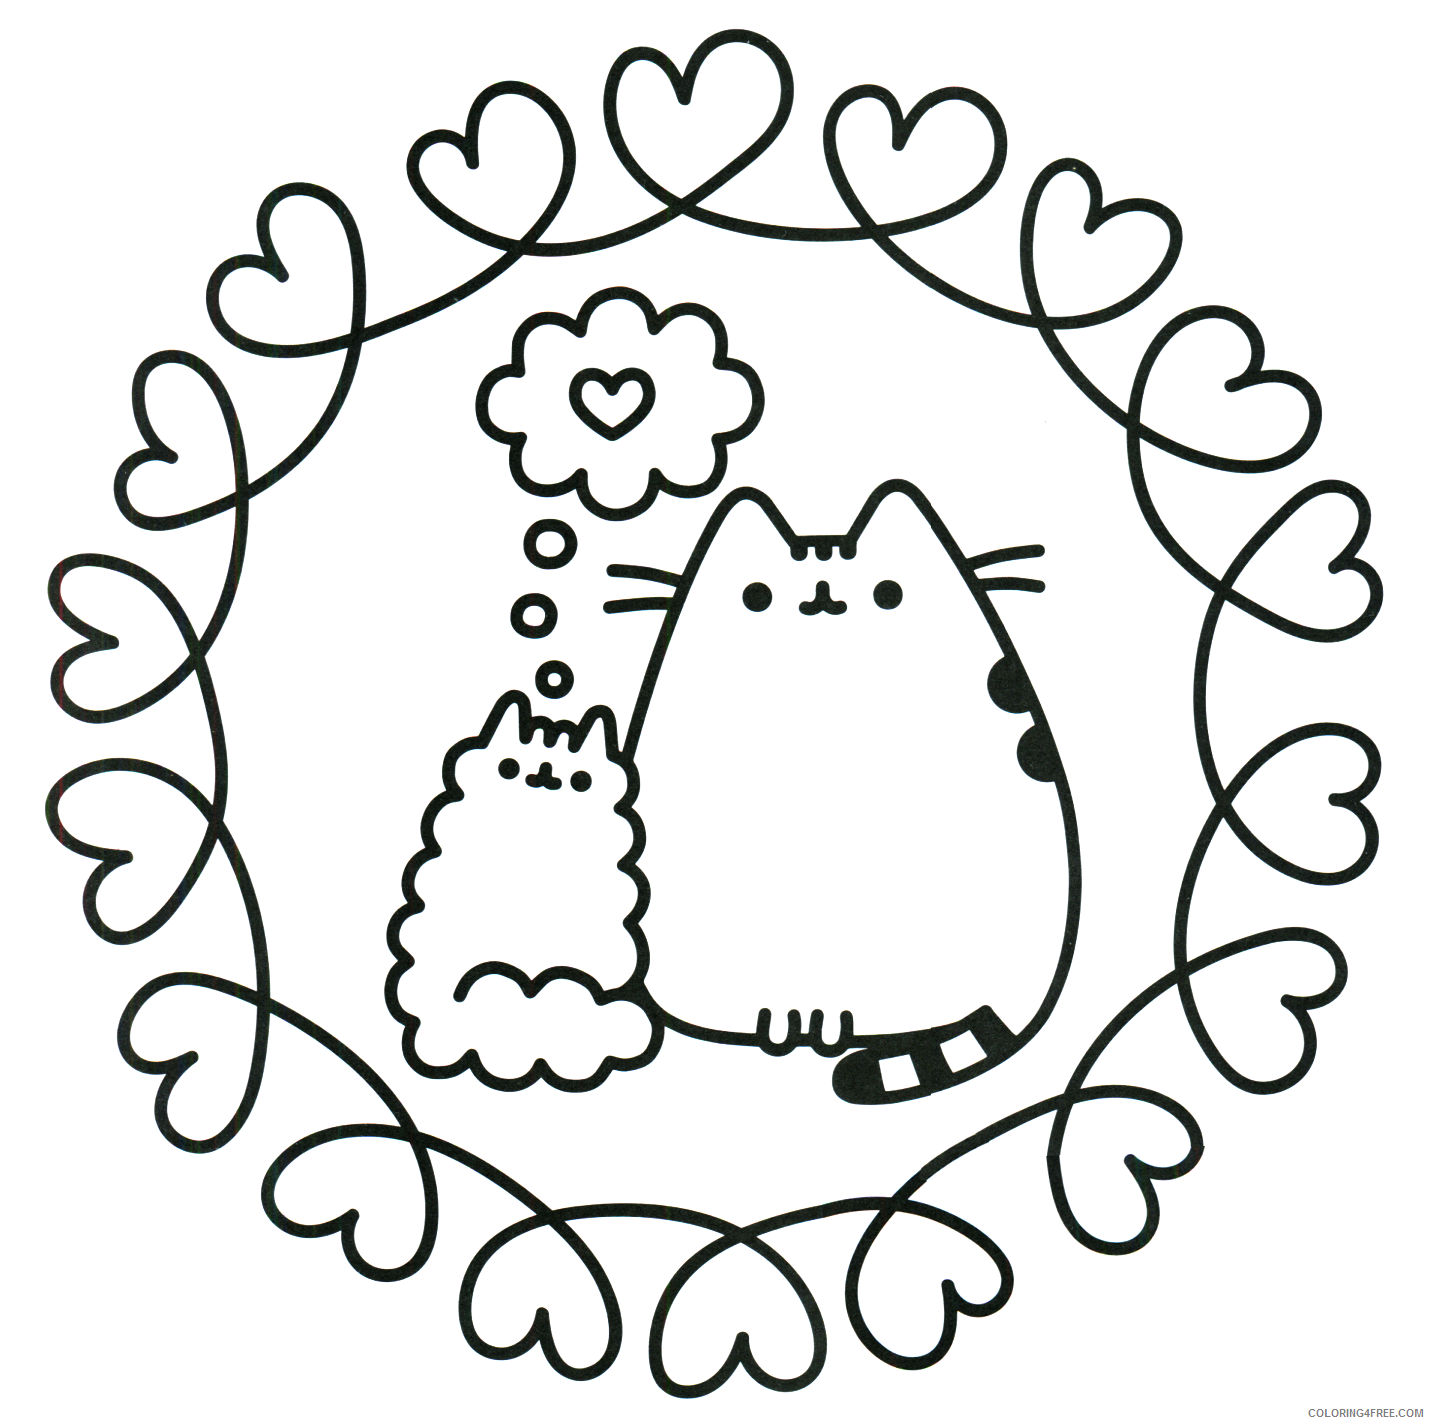 Pusheen Coloring Pages Cartoons Cats in Love Pusheen Printable 2020 5179 Coloring4free